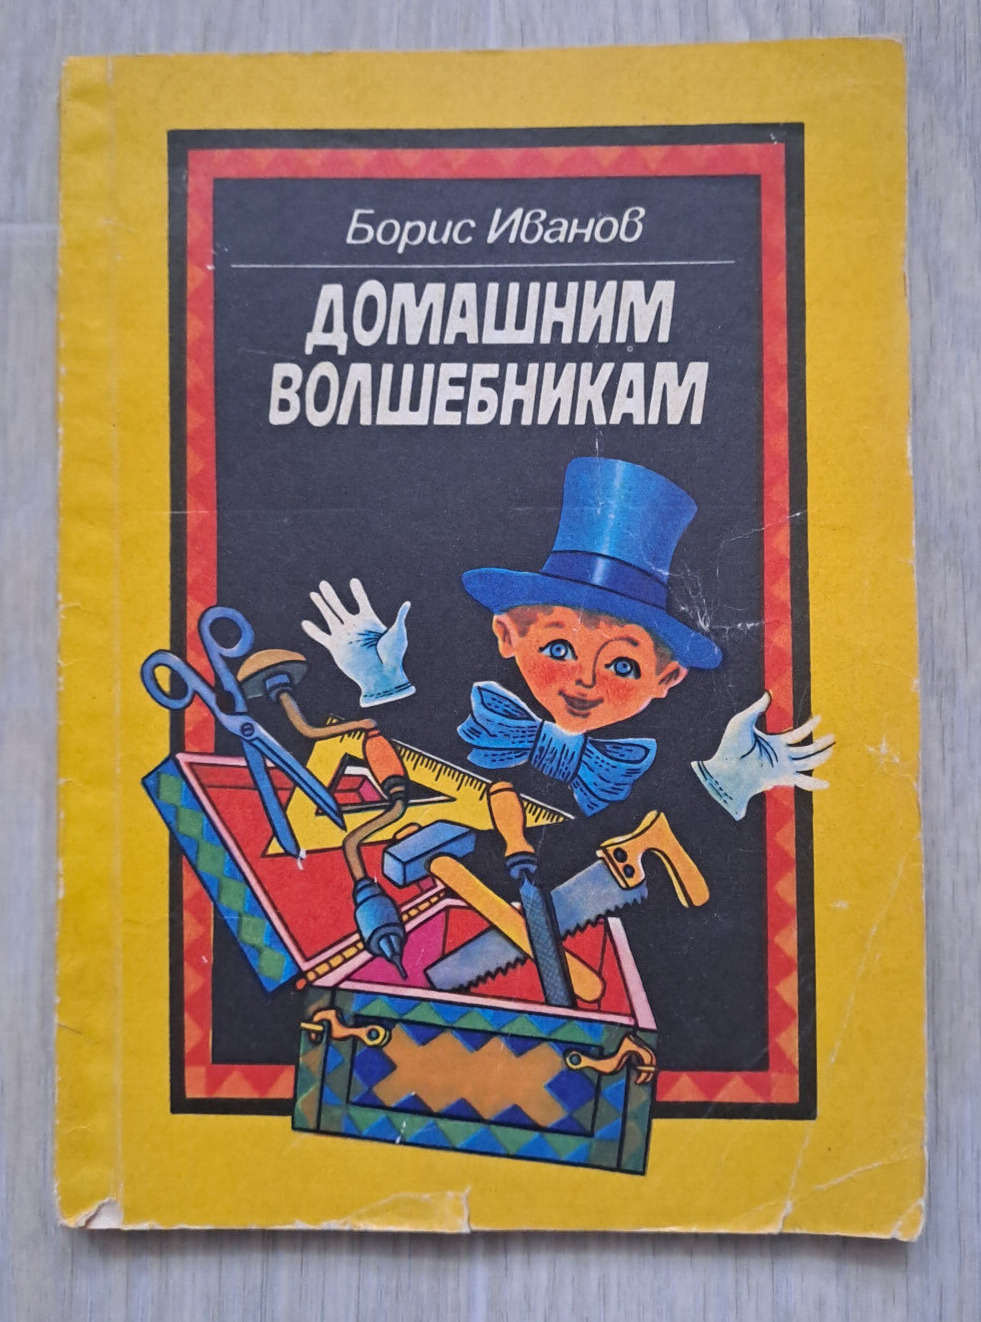 1986 For home wizards Handmade Carpentry crafts Popular science Russian book